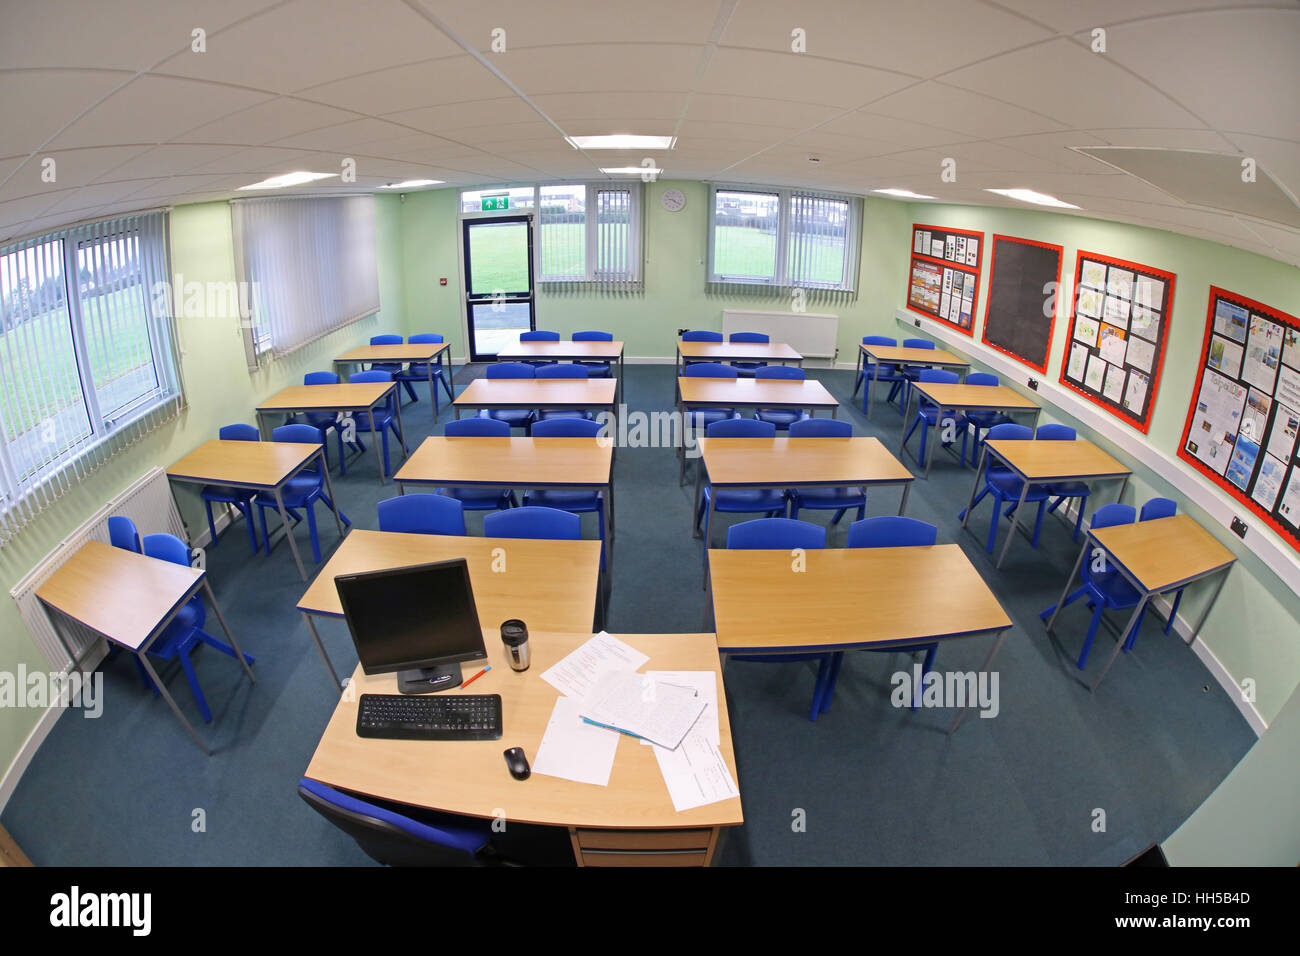 Wide-angle view of a newly built school classroom showing desks and chairs in a traditional layout, facing the teachers desk. Empty, no pupils. Stock Photo